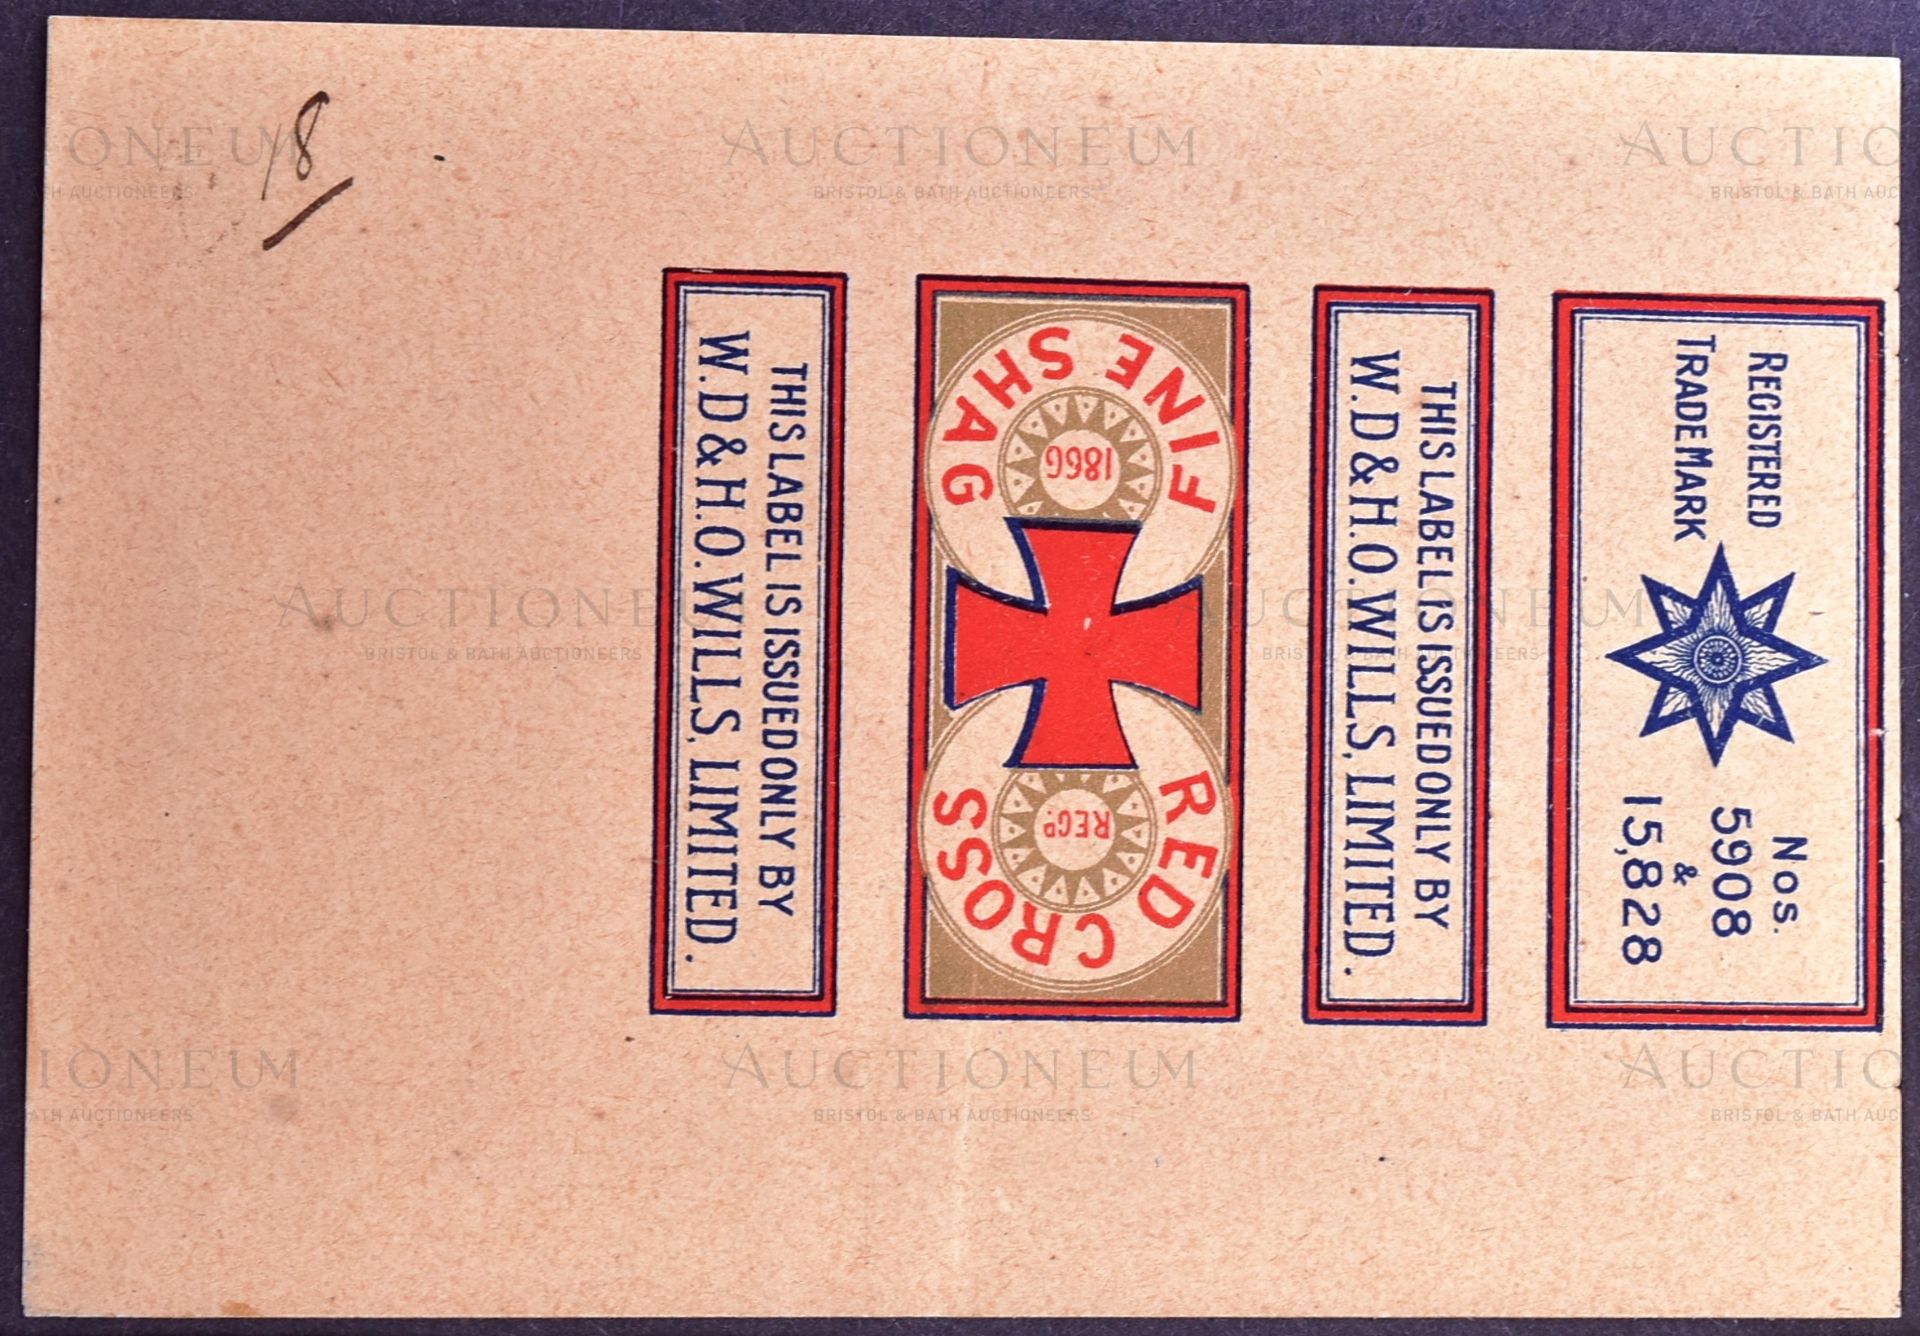 MARDON, SON & HALL - EARLY 20TH CENTURY CIGARETTE PACKET DESIGNS - Image 3 of 7